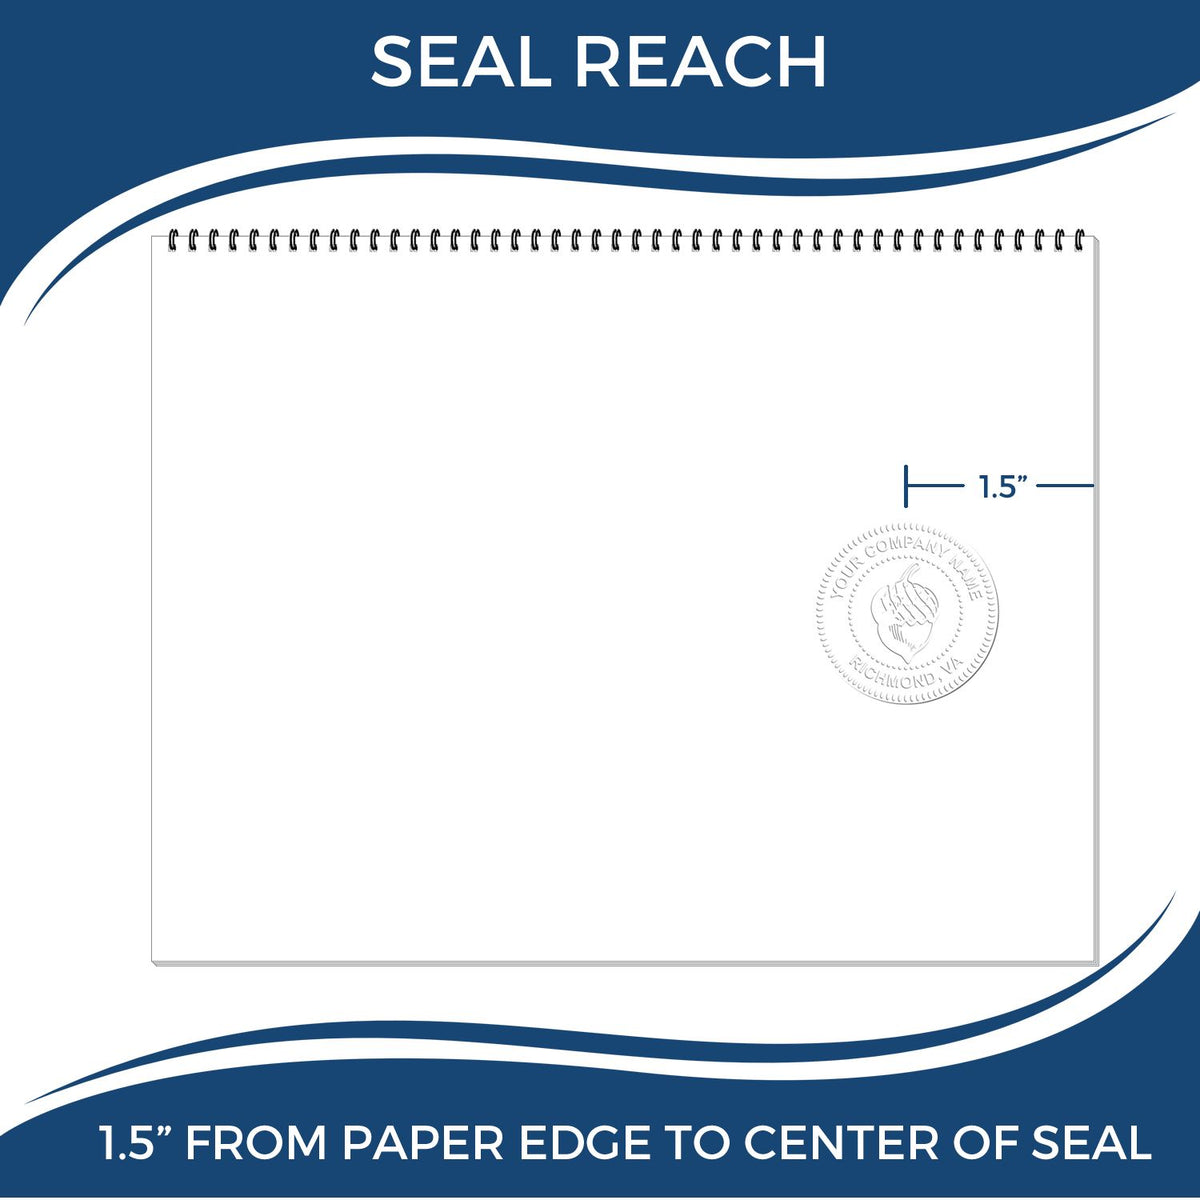 An infographic showing the seal reach which is represented by a ruler and a miniature seal image of the Hybrid Oklahoma Landscape Architect Seal